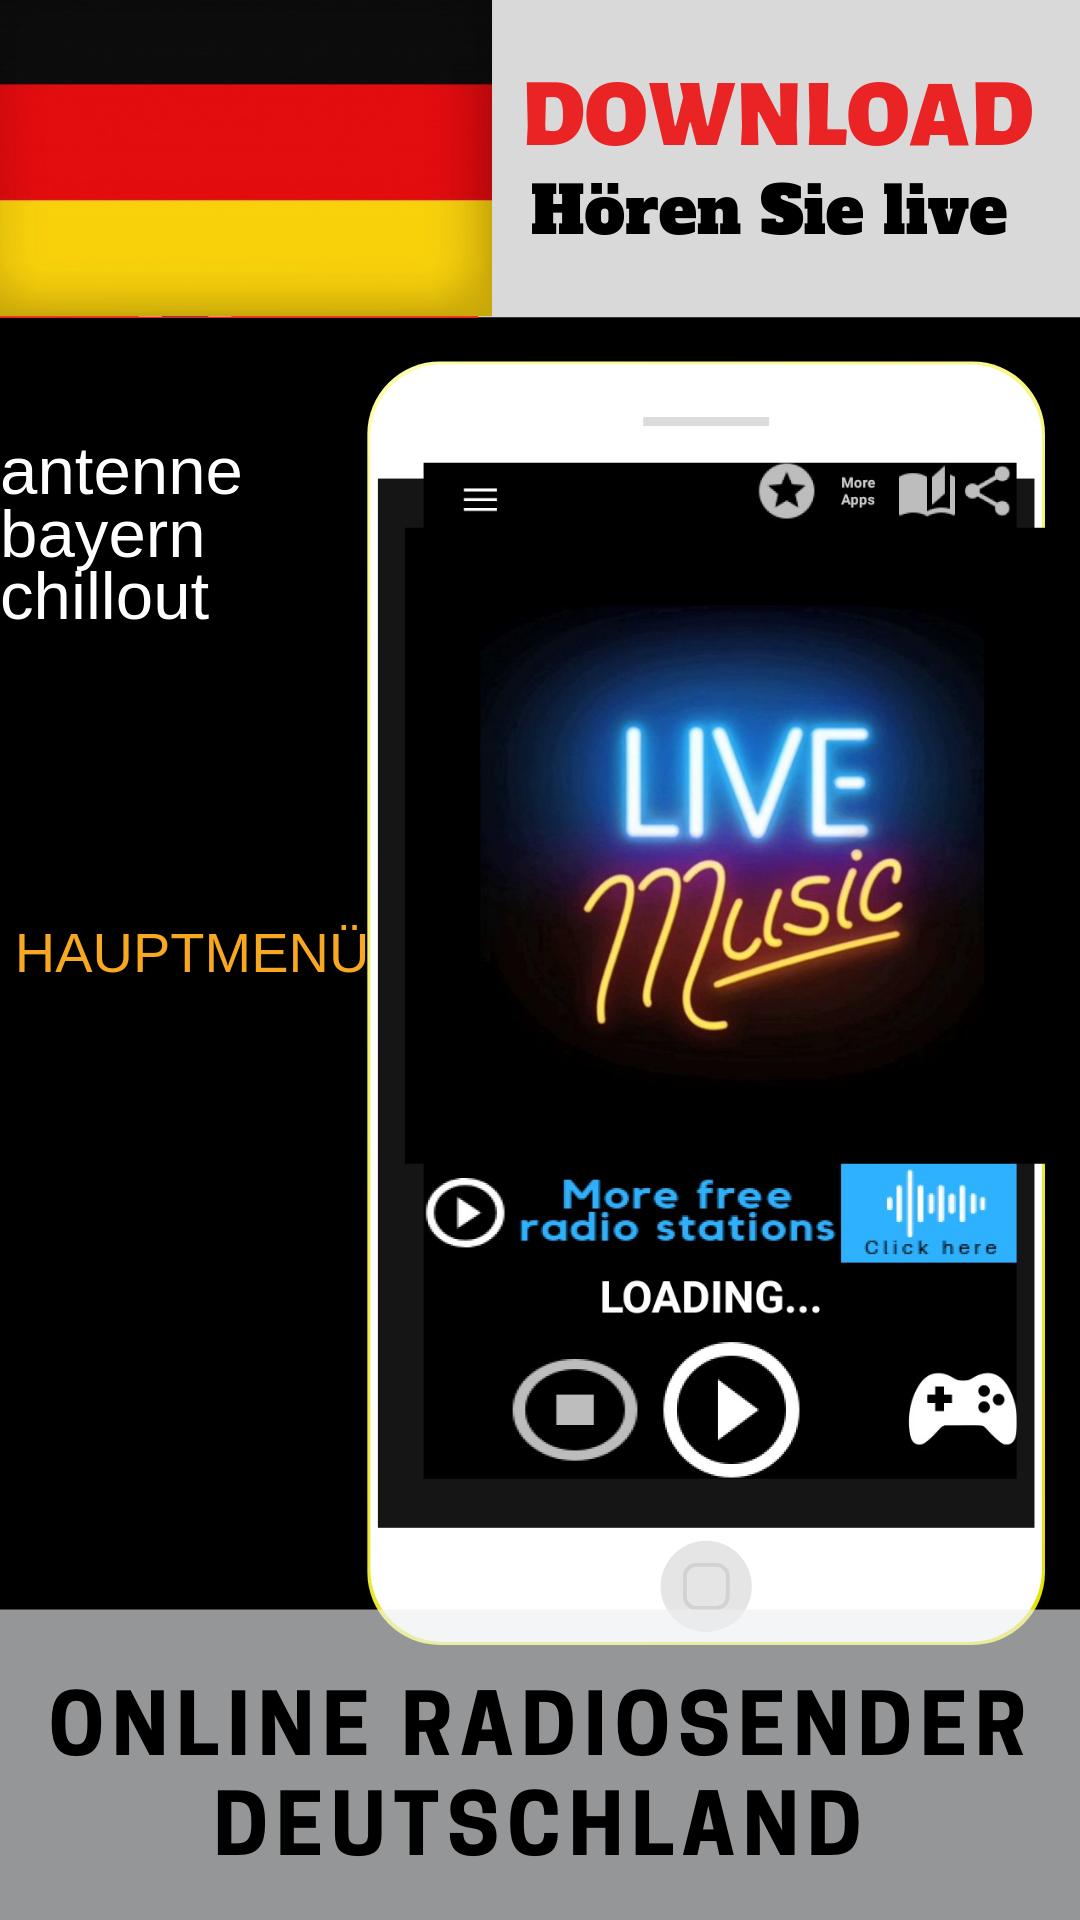 Antenne Bayern Chillout Download APK Free for Android - APKtume.com